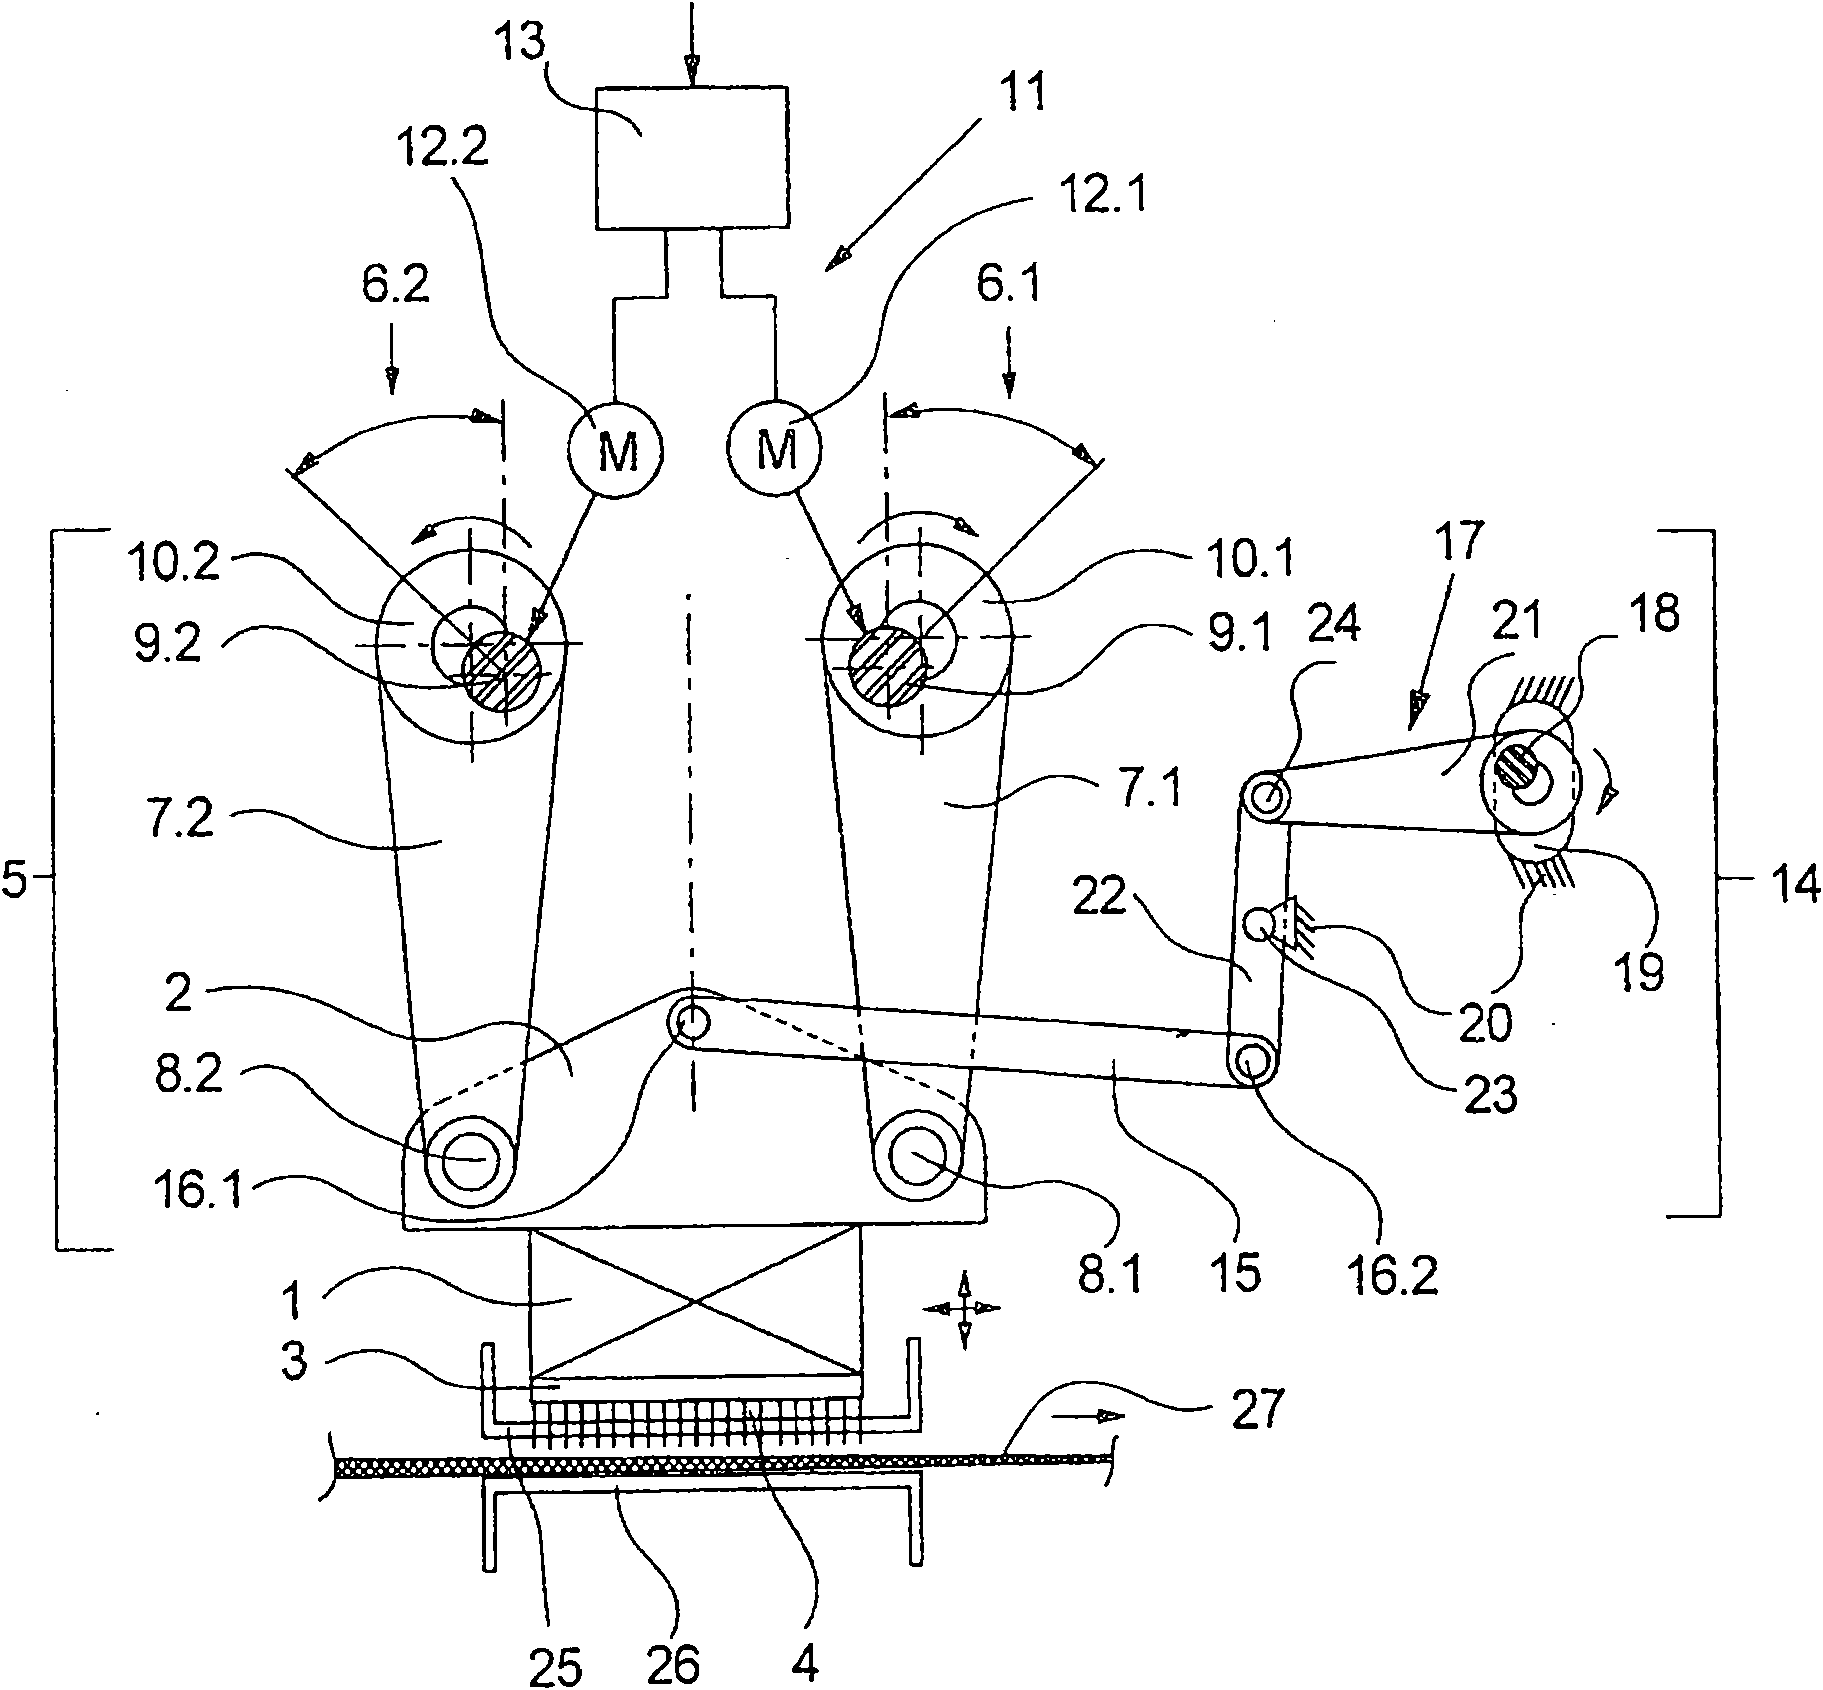 Apparatus for needling a fibrous web